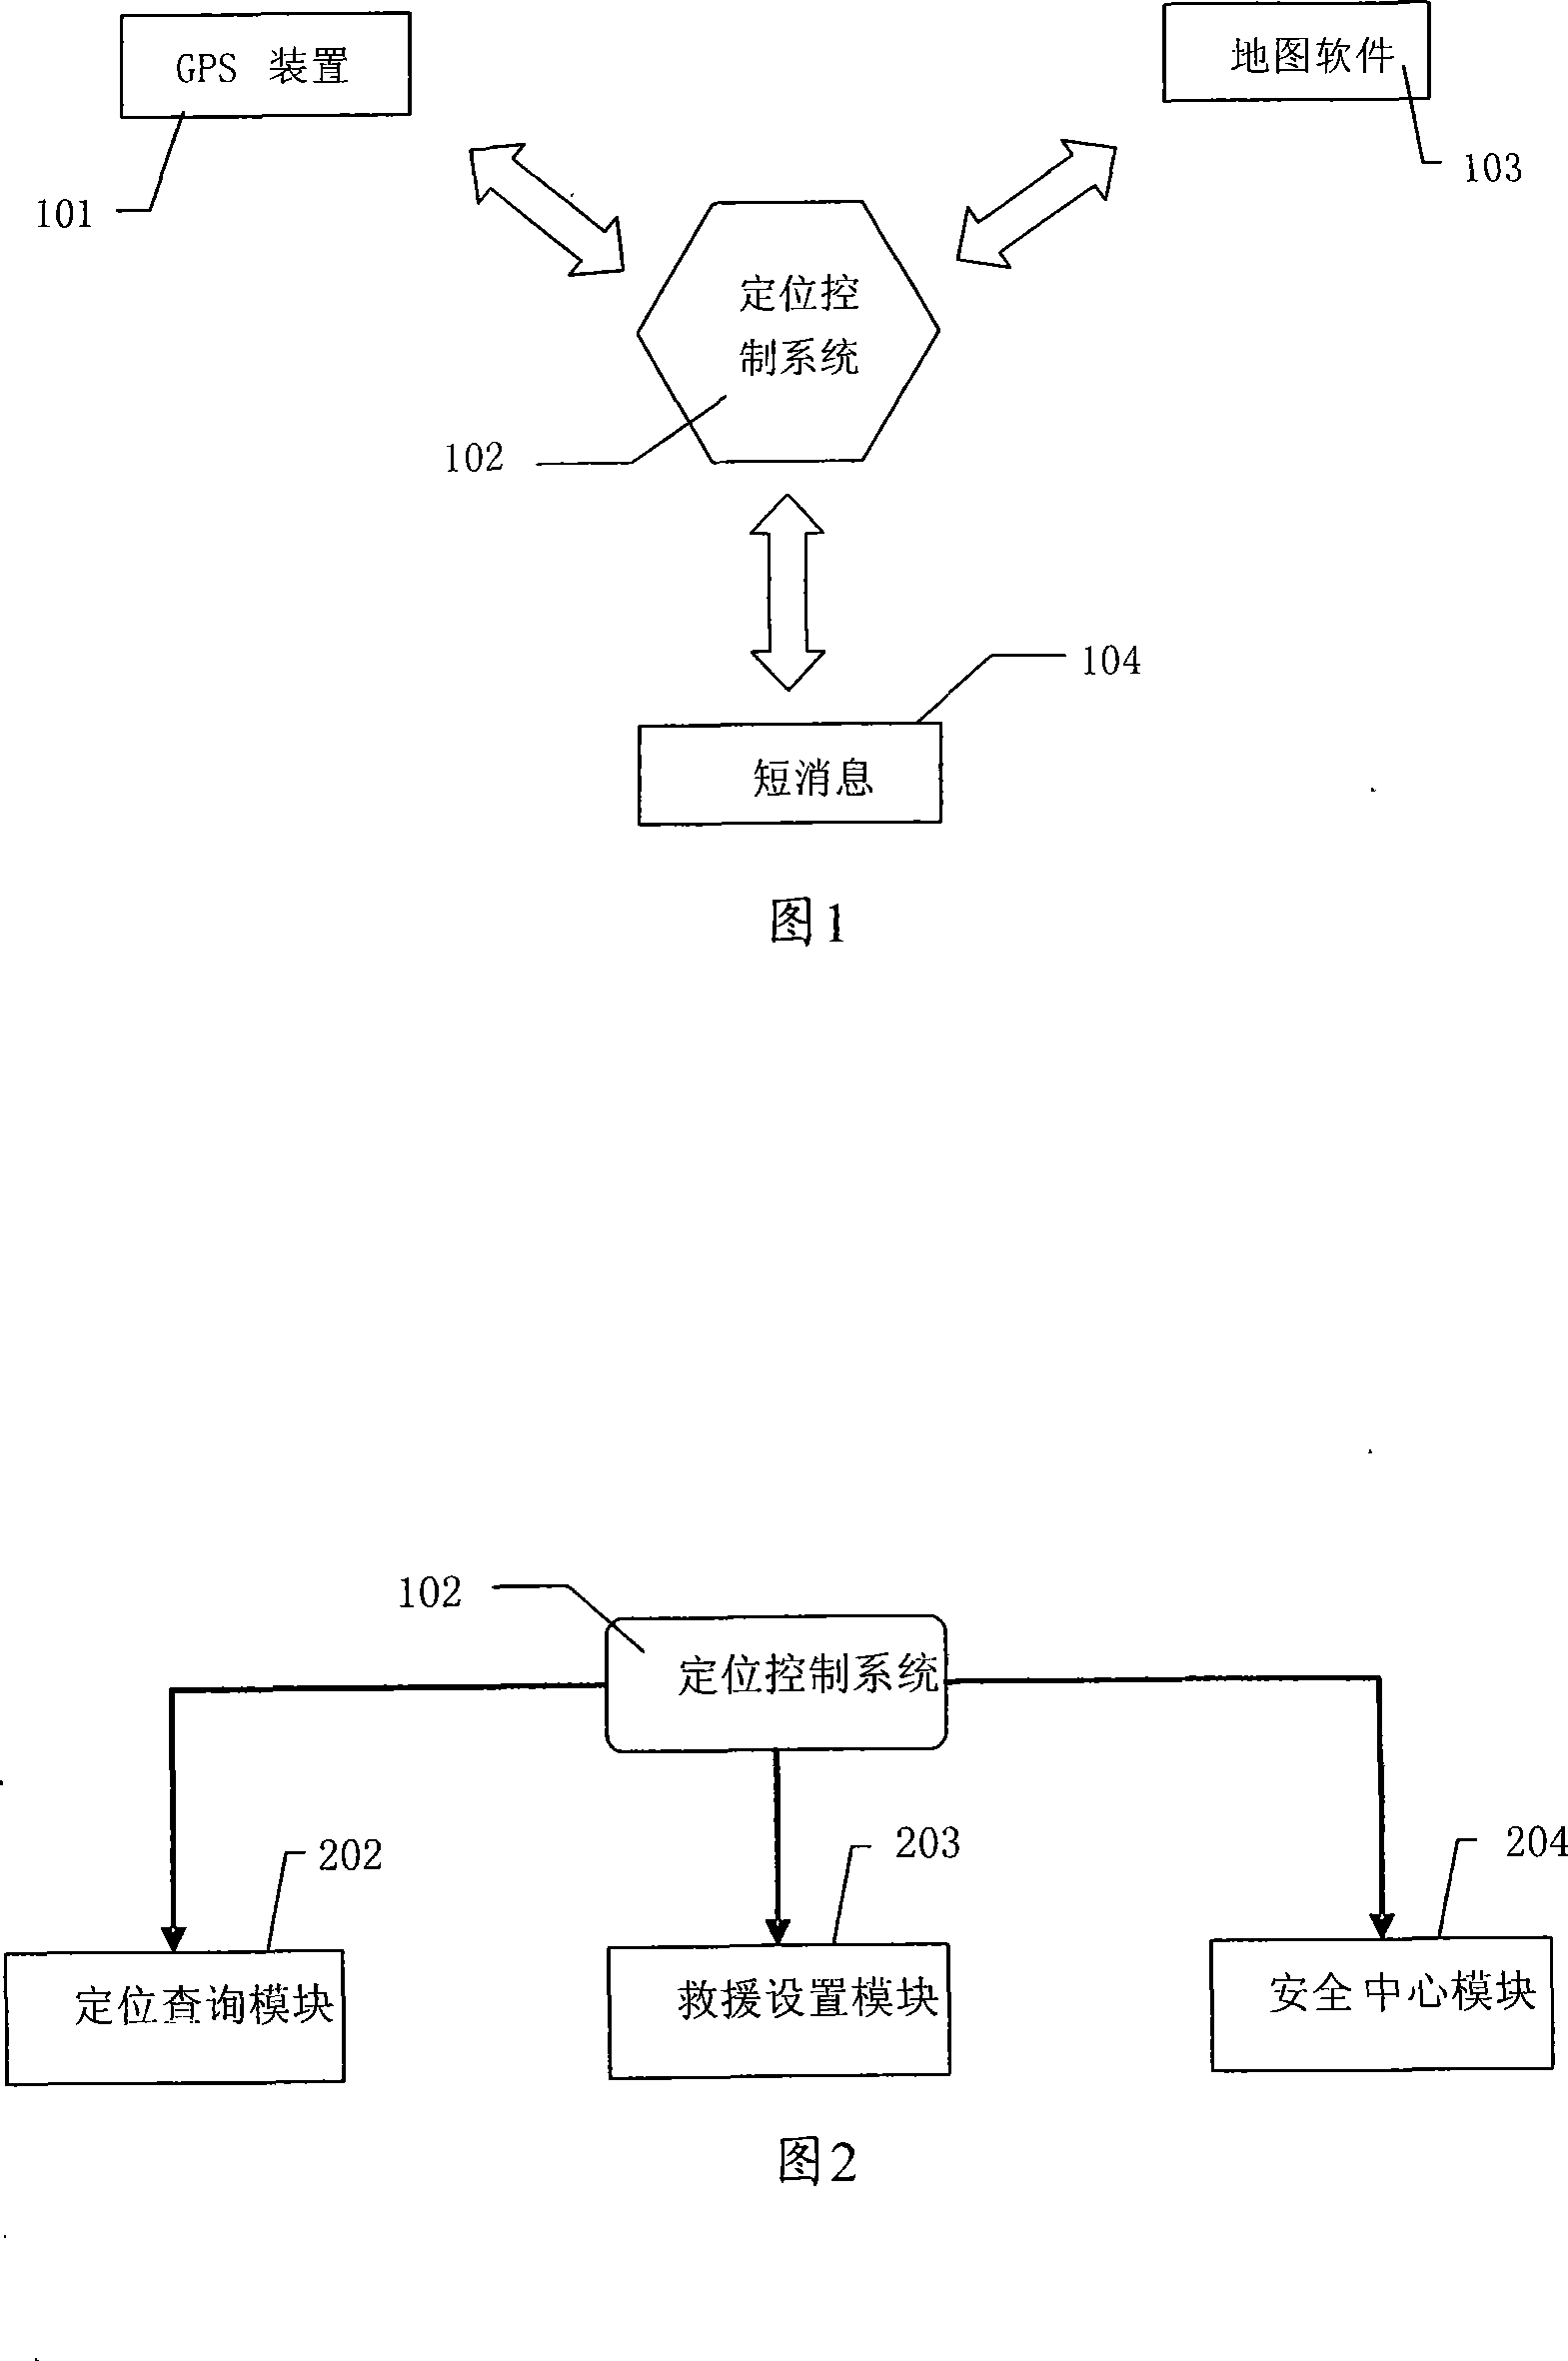 System and method for position control using short message and GPS intelligent terminal